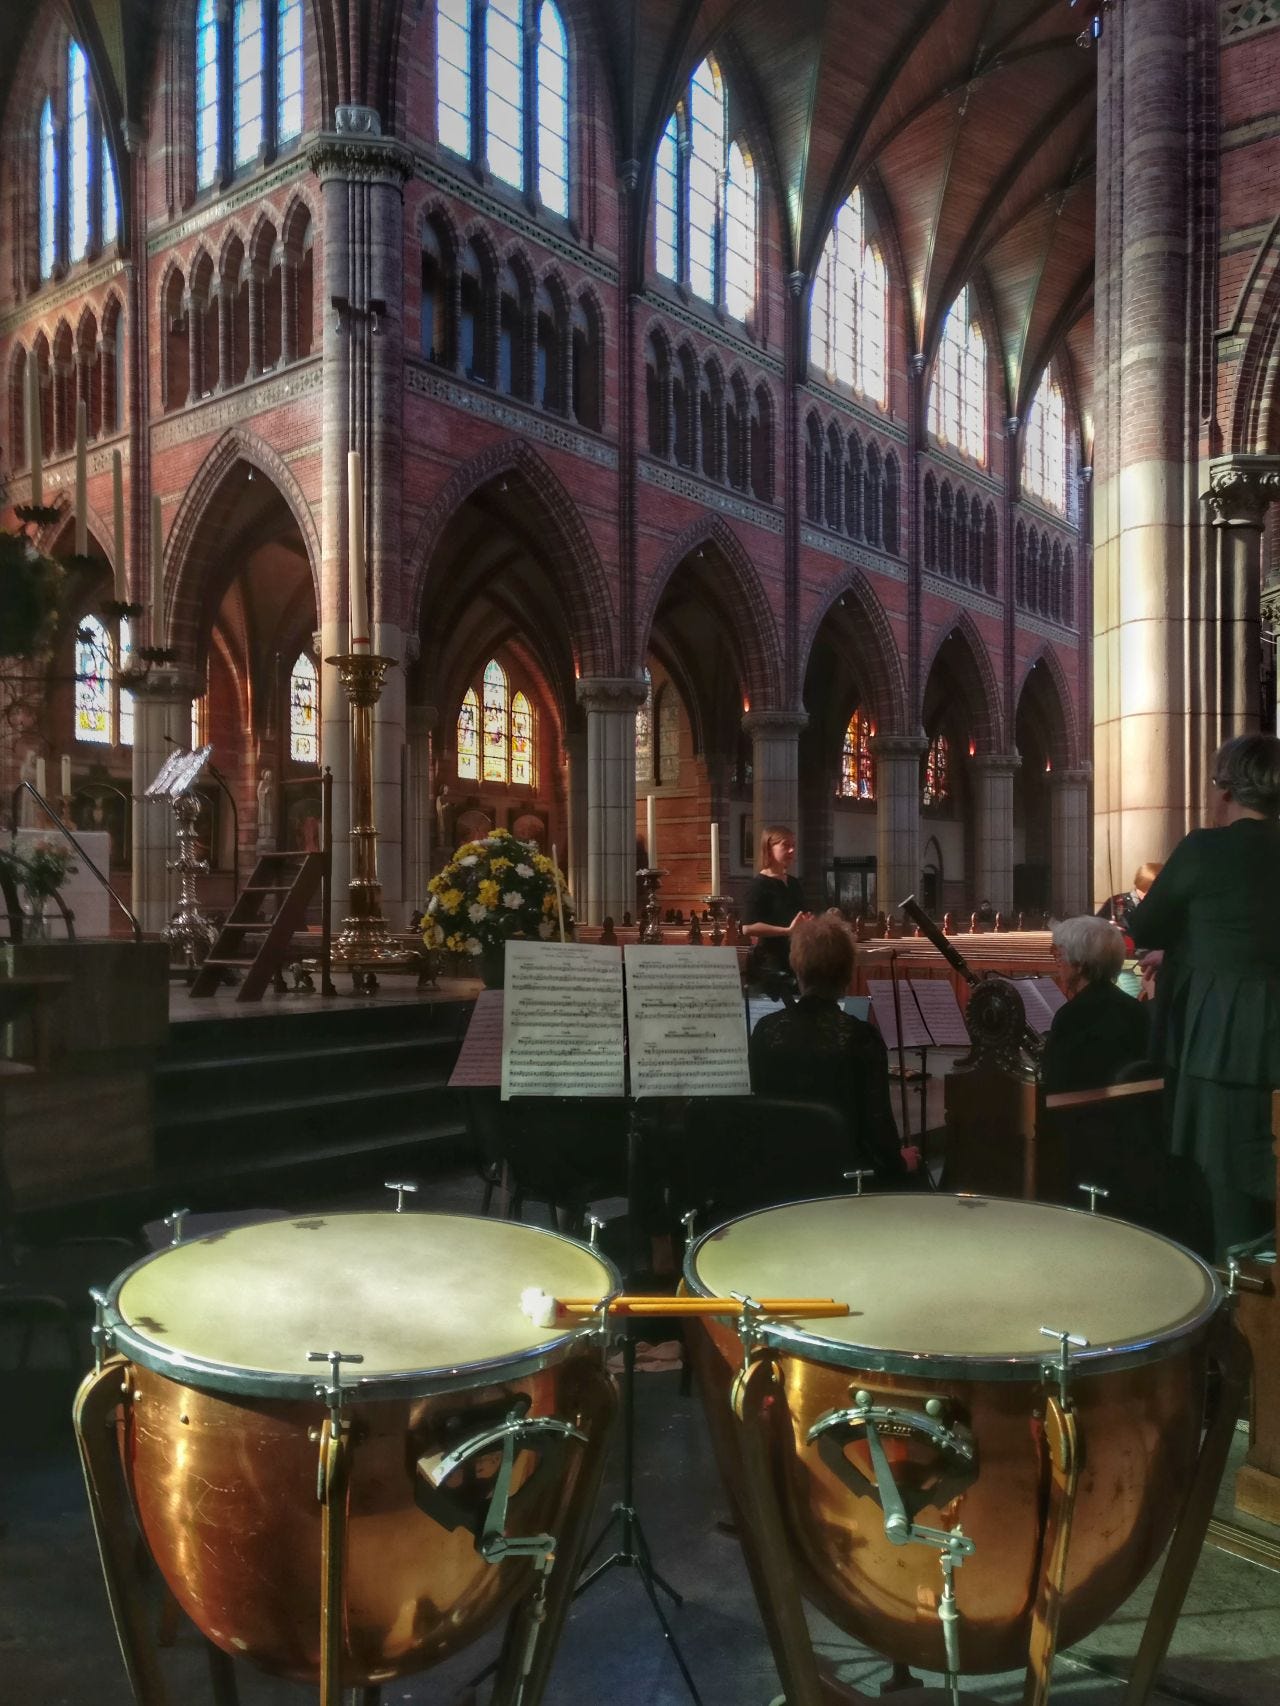 a pair of kettle drums in a church